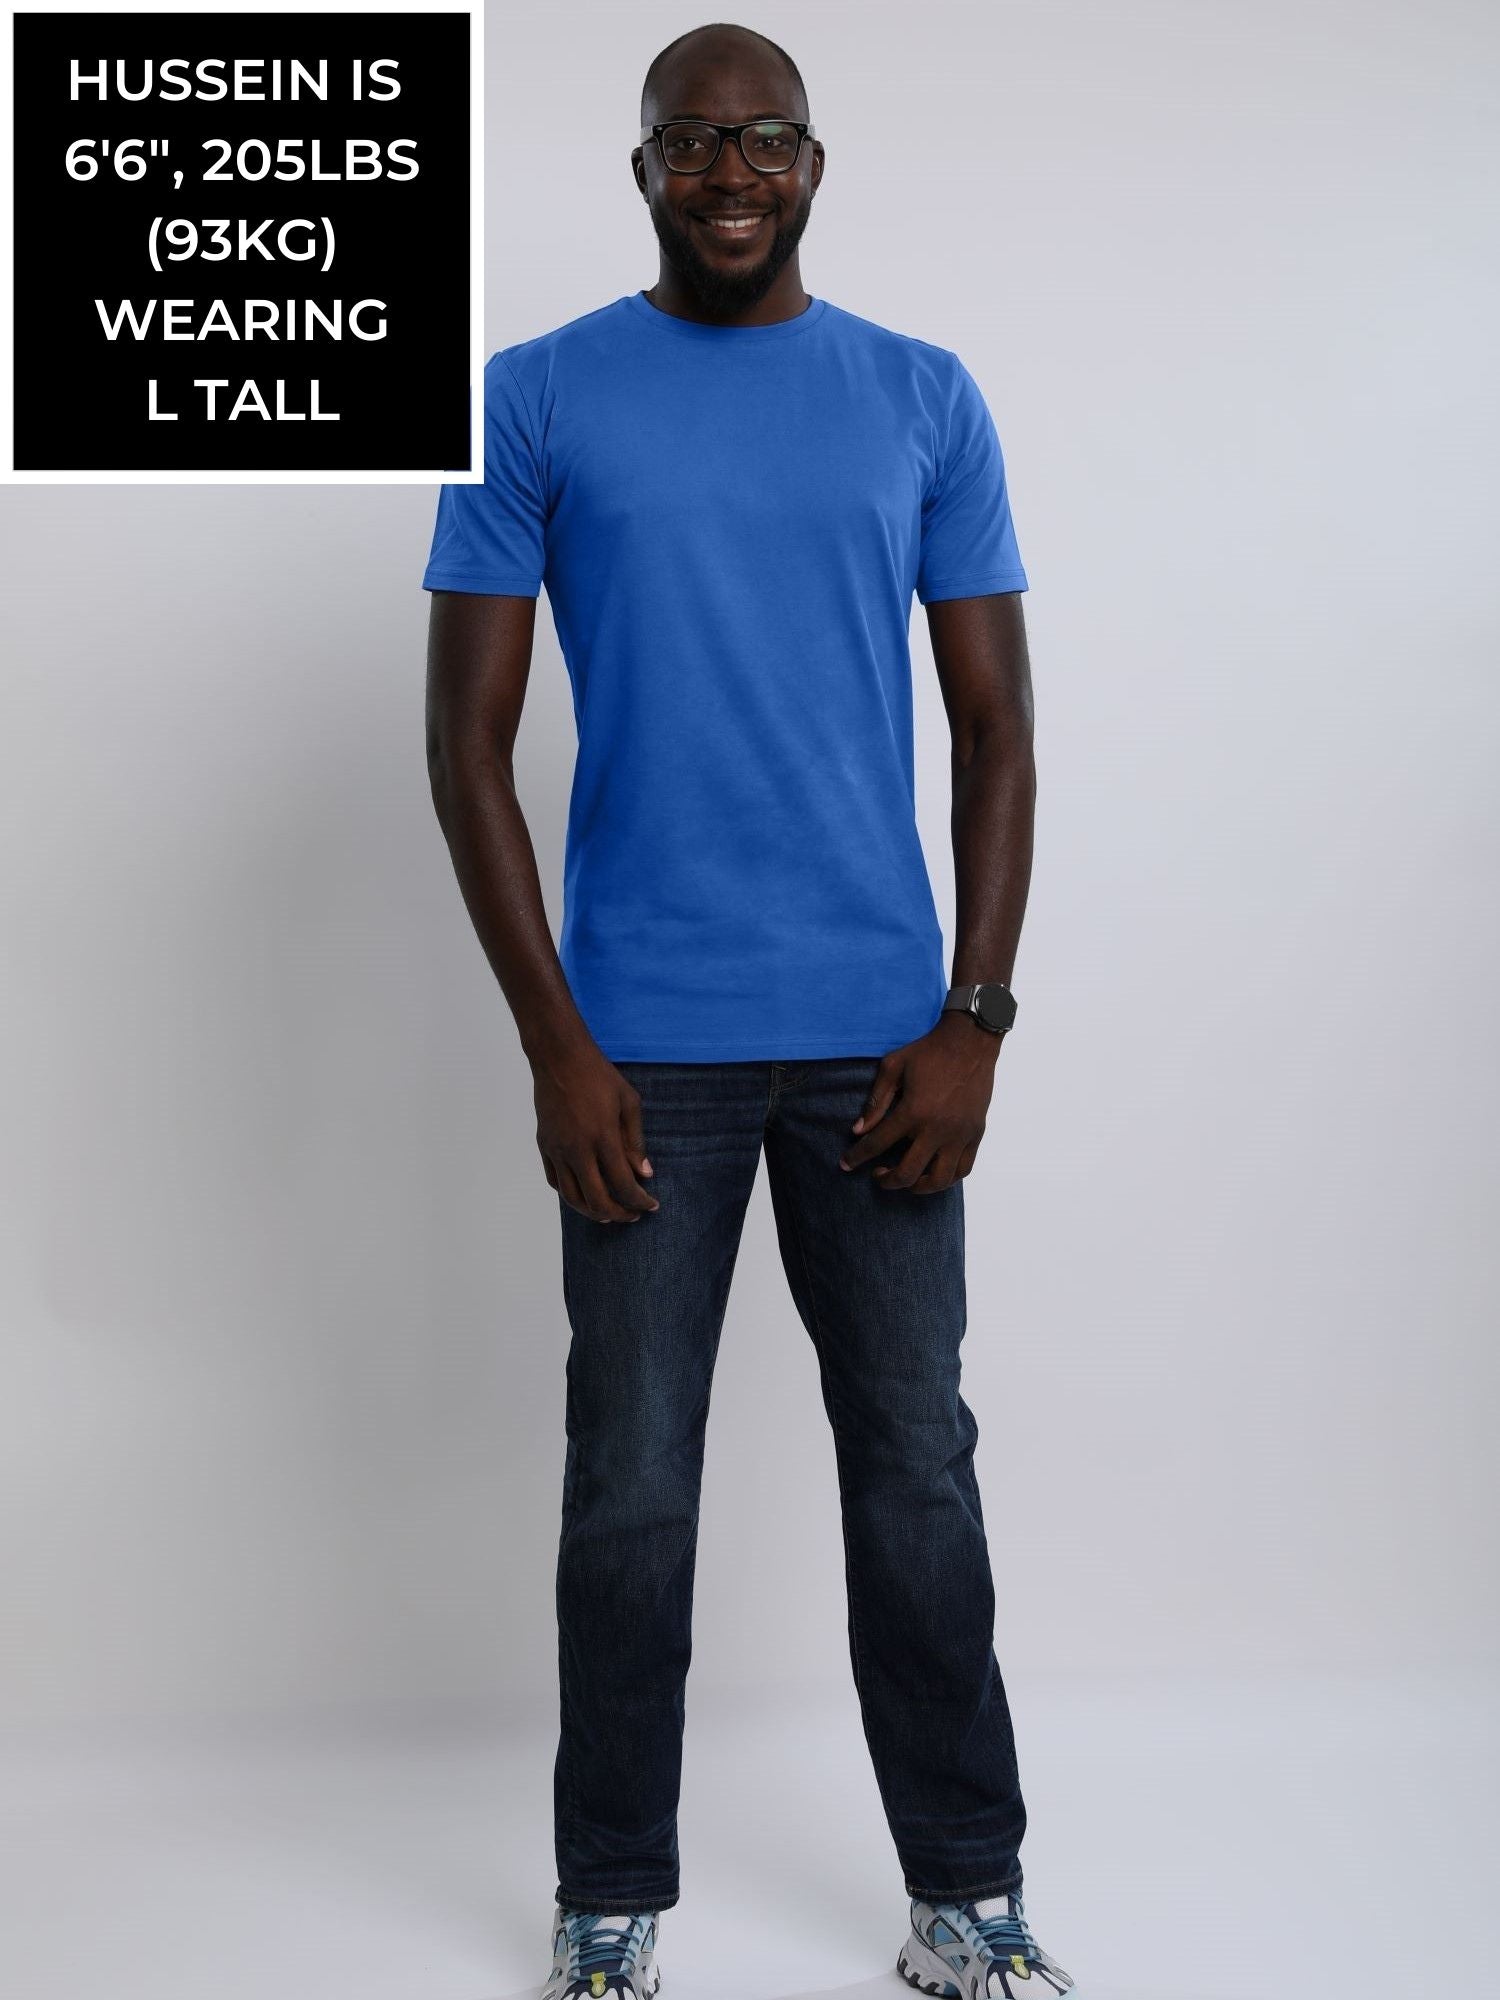 A head to toe shot of a tall athletic guy wearing a medium blue large tall t-shirt.